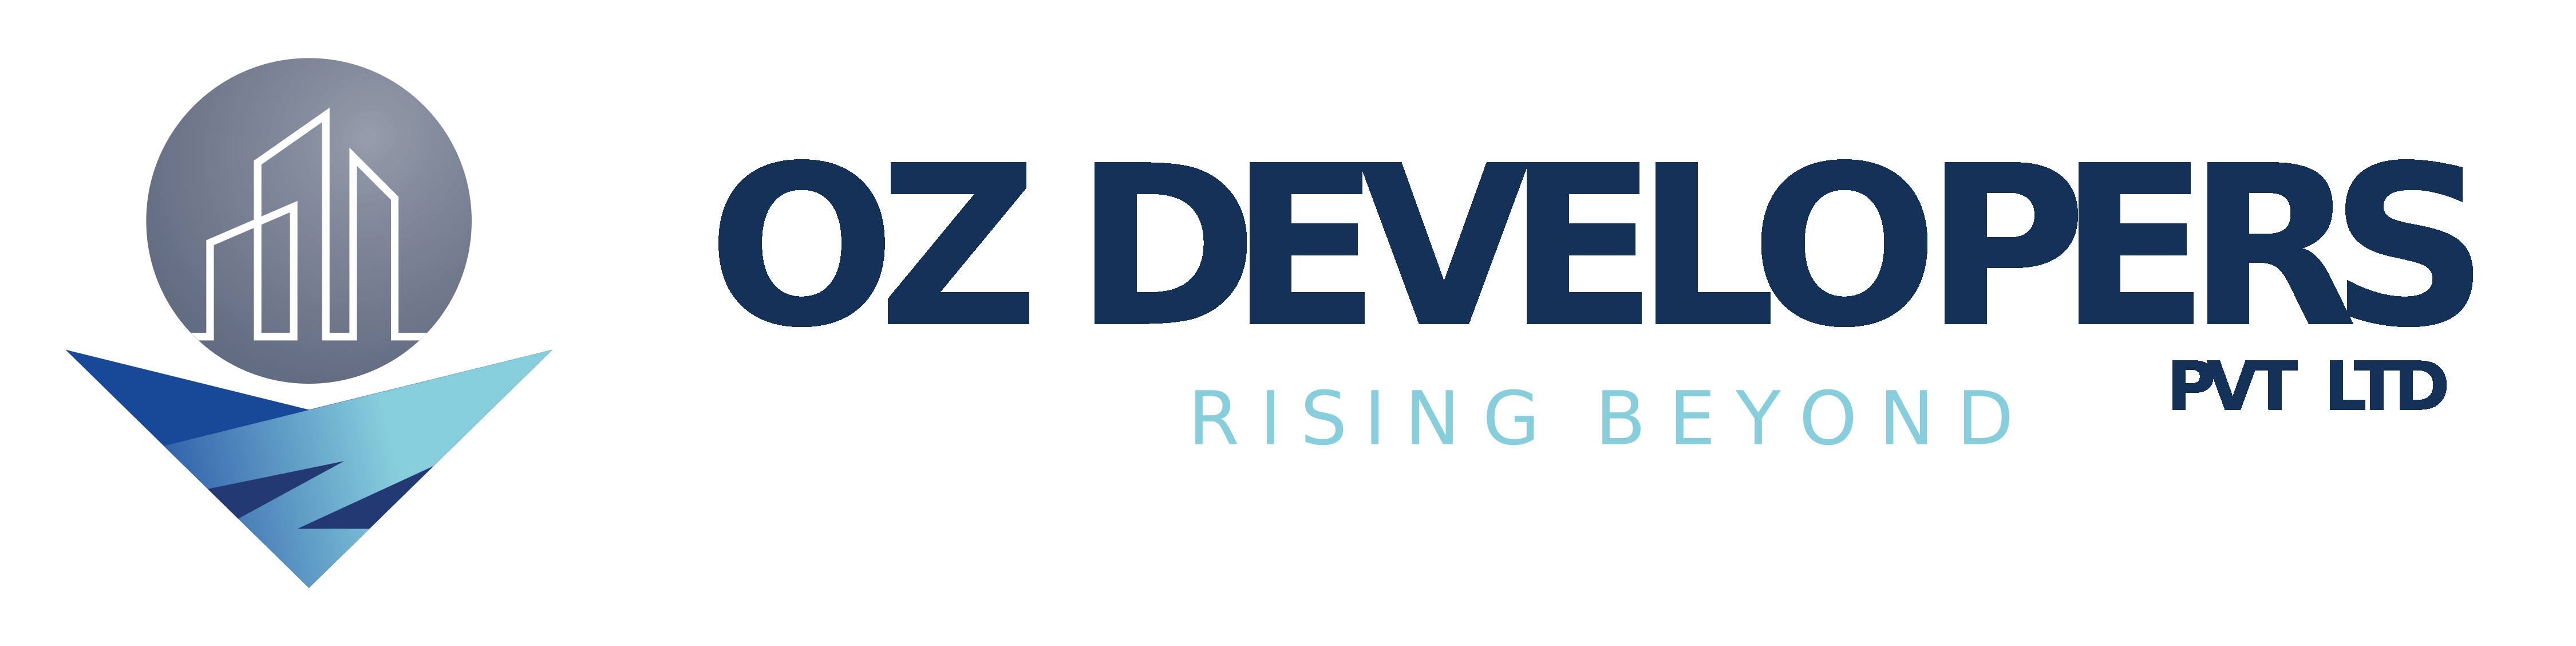 Builders & Developers: Crafting Dreams into Reality with OZ Developers